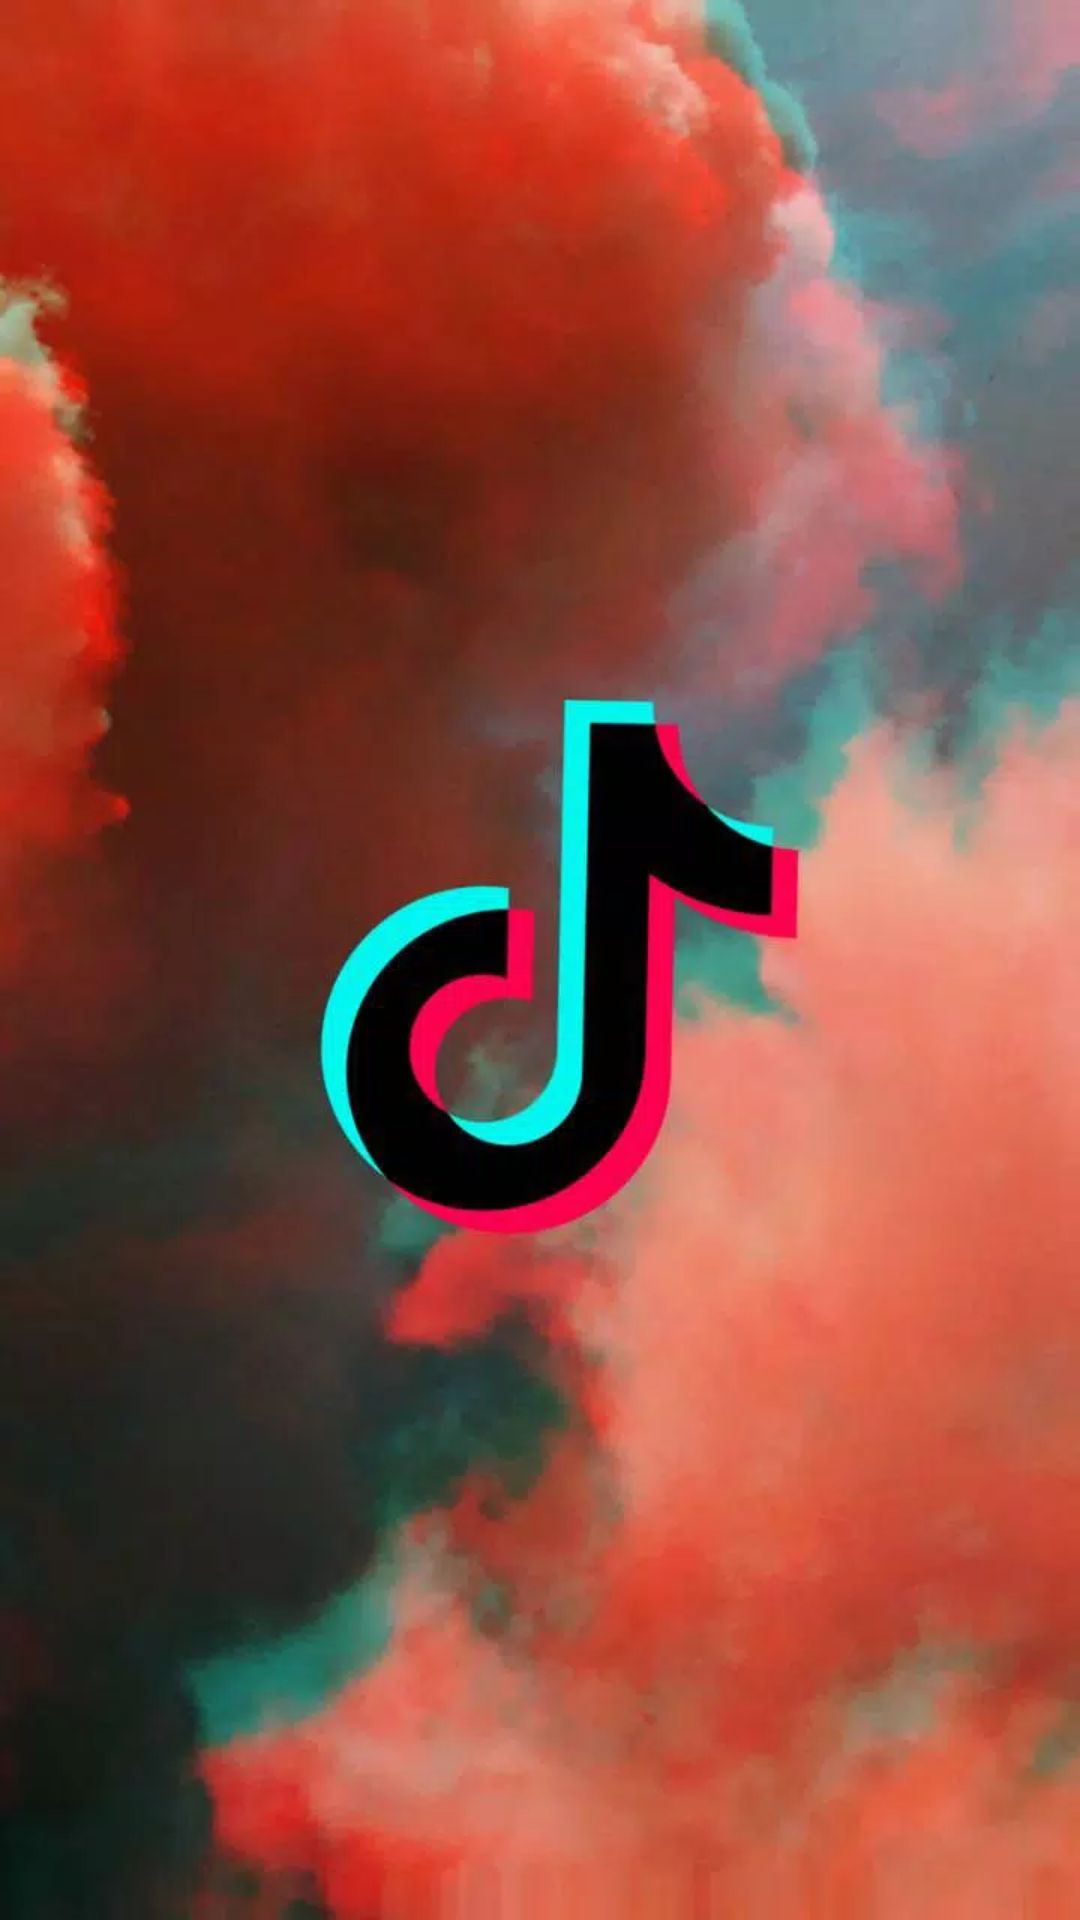 The logo of tiktok is shown in a red and pink cloud - TikTok